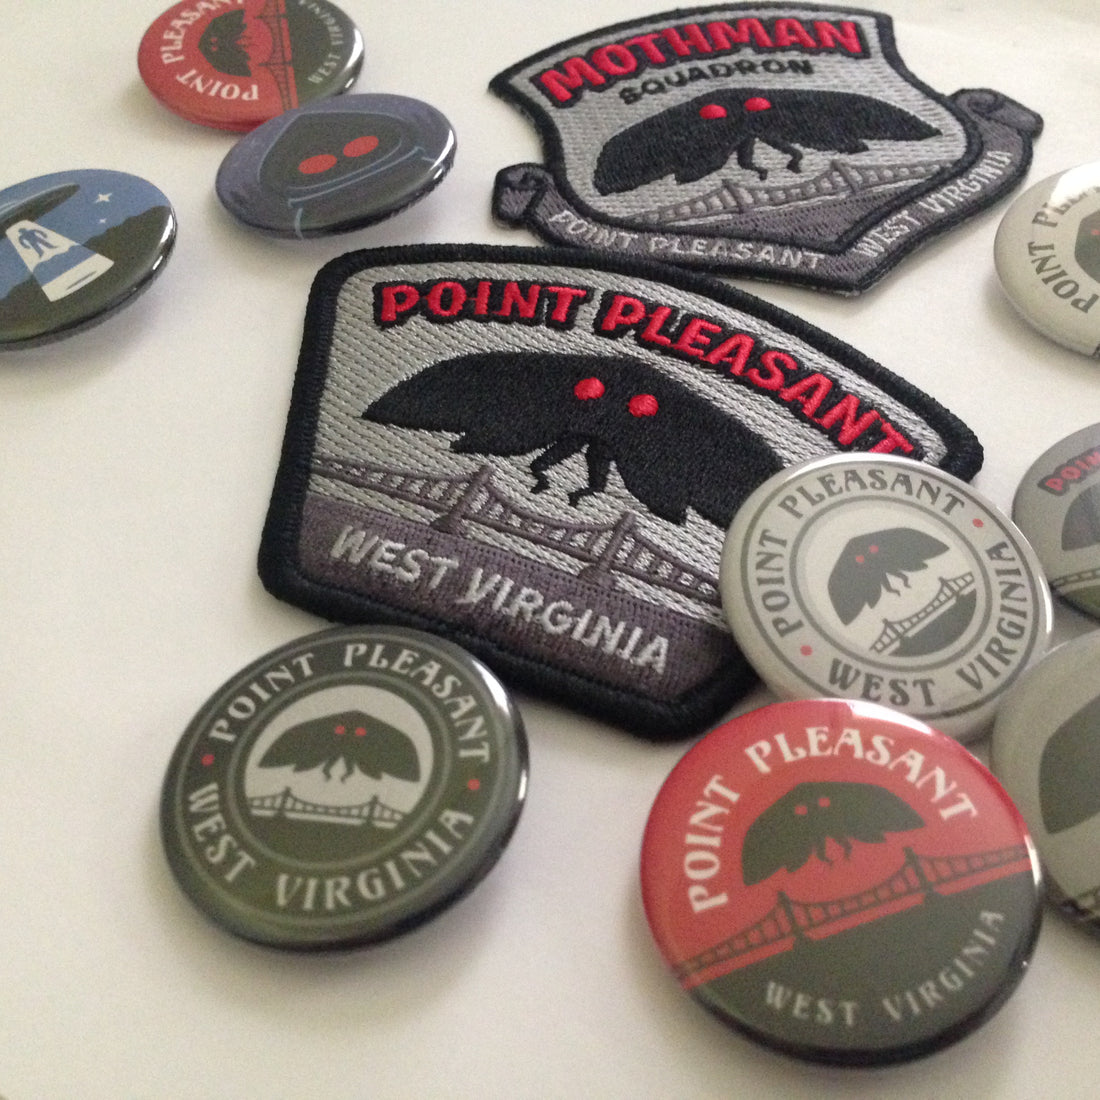 Mothman Point Pleasant, West Virginia embroidered patches & buttons.